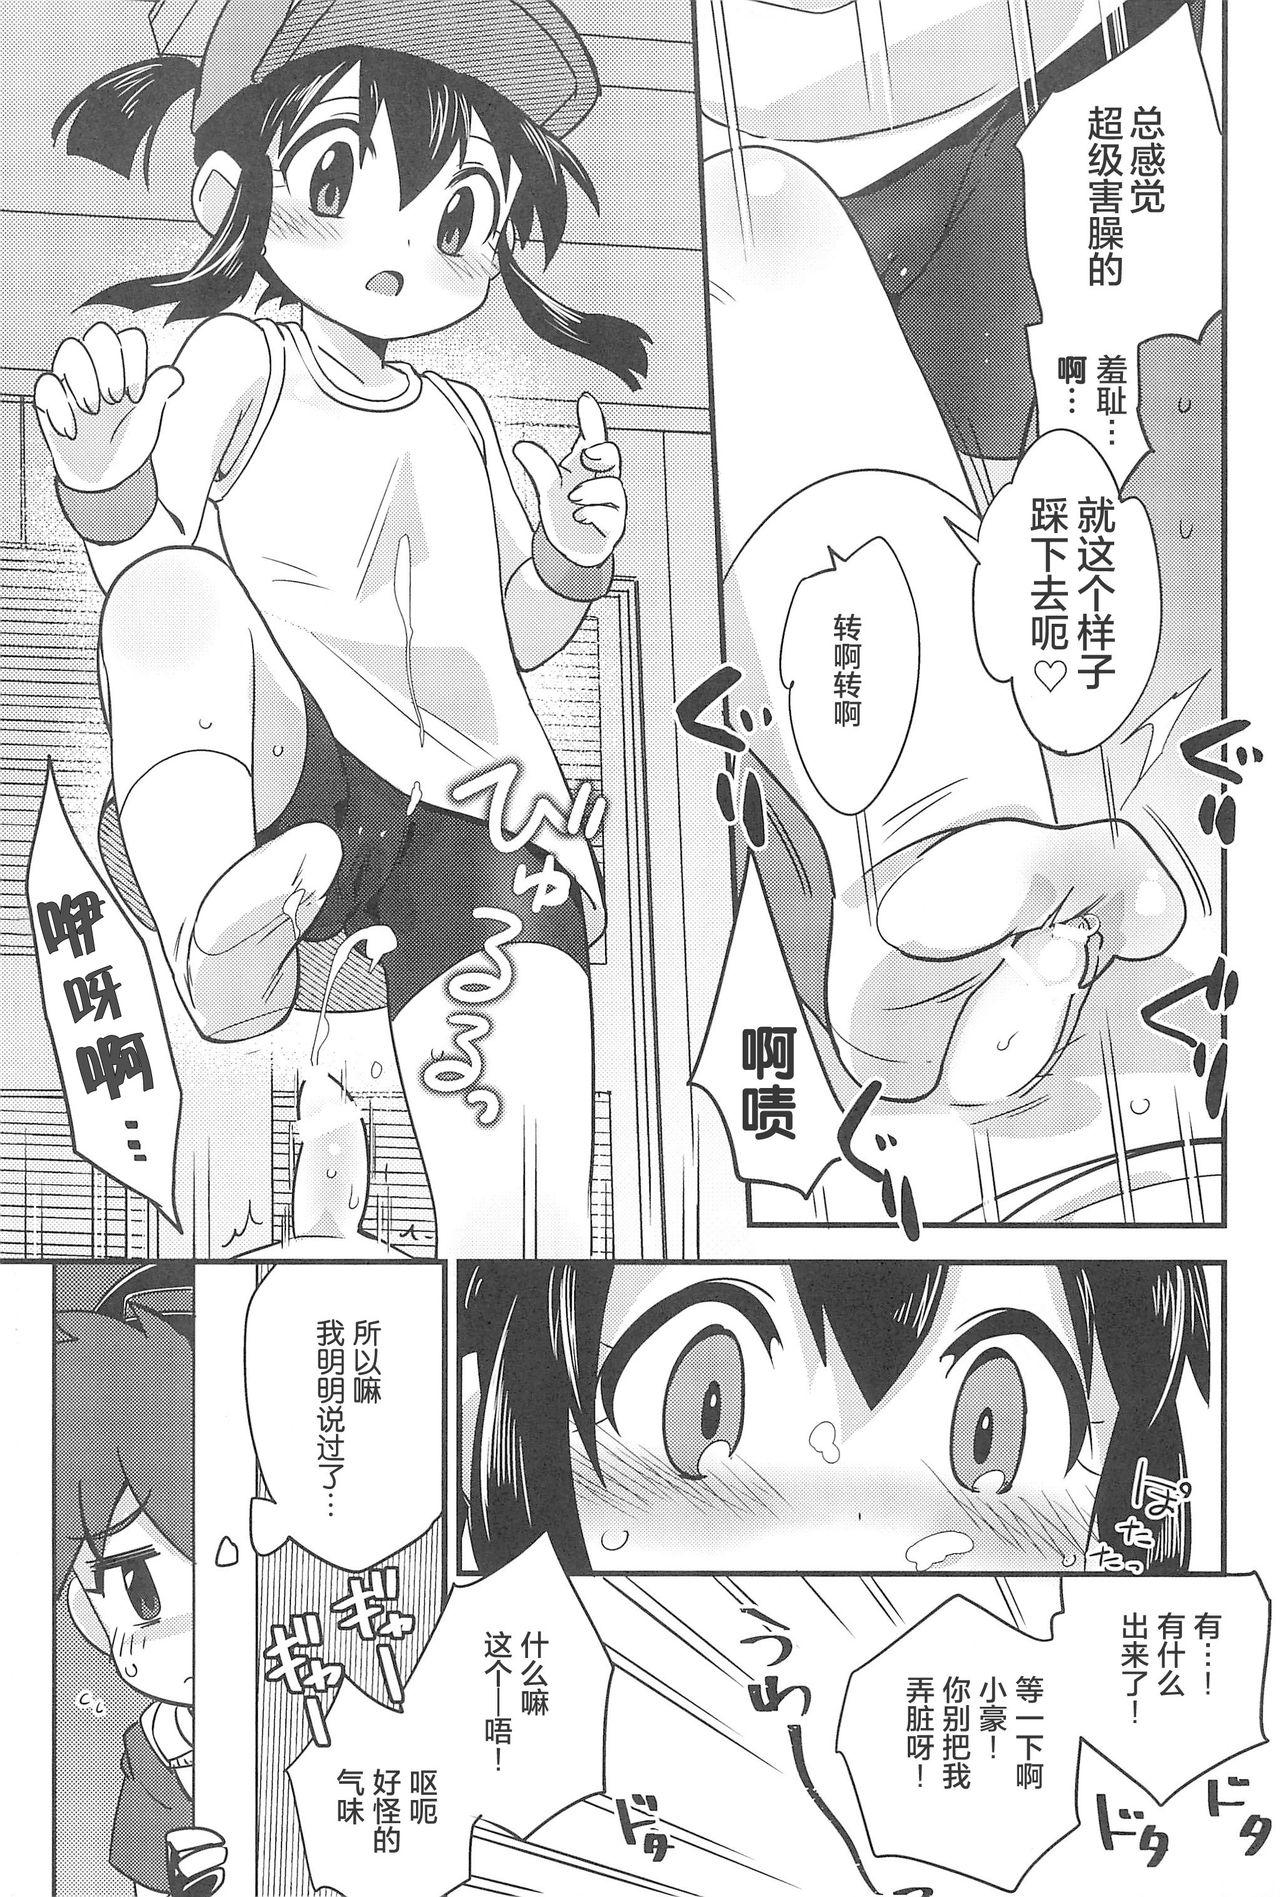 Swallow Denki no Chikaratte Sugee! - Bakusou kyoudai lets and go Bus - Page 11